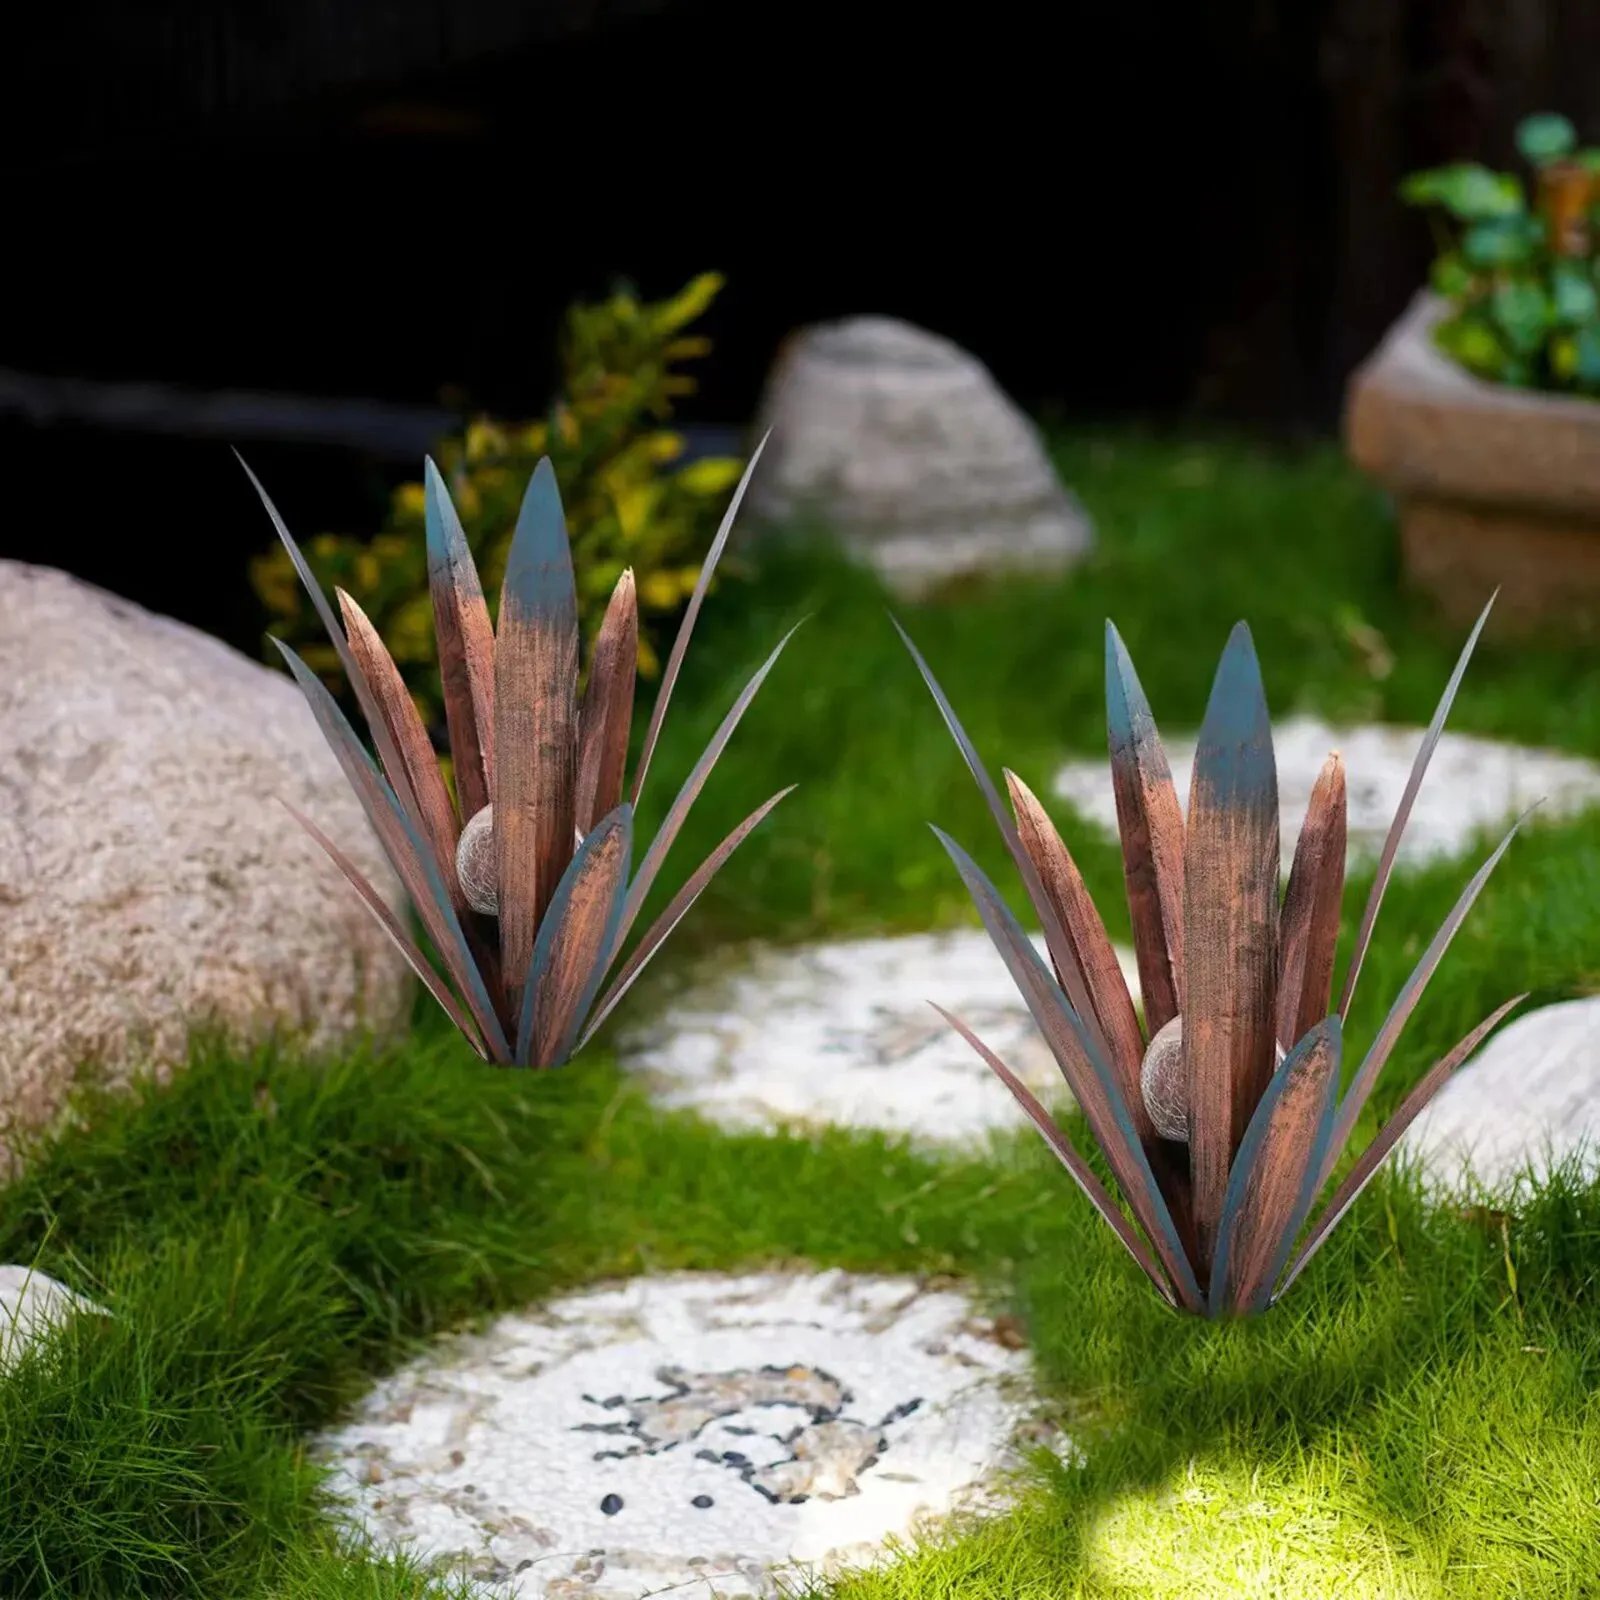 2 PCS LED Metal Agave Sculpture Decoration, Vintage Country Hand-Painted Sculpture DIY , Home Garden Courtyard Lawn